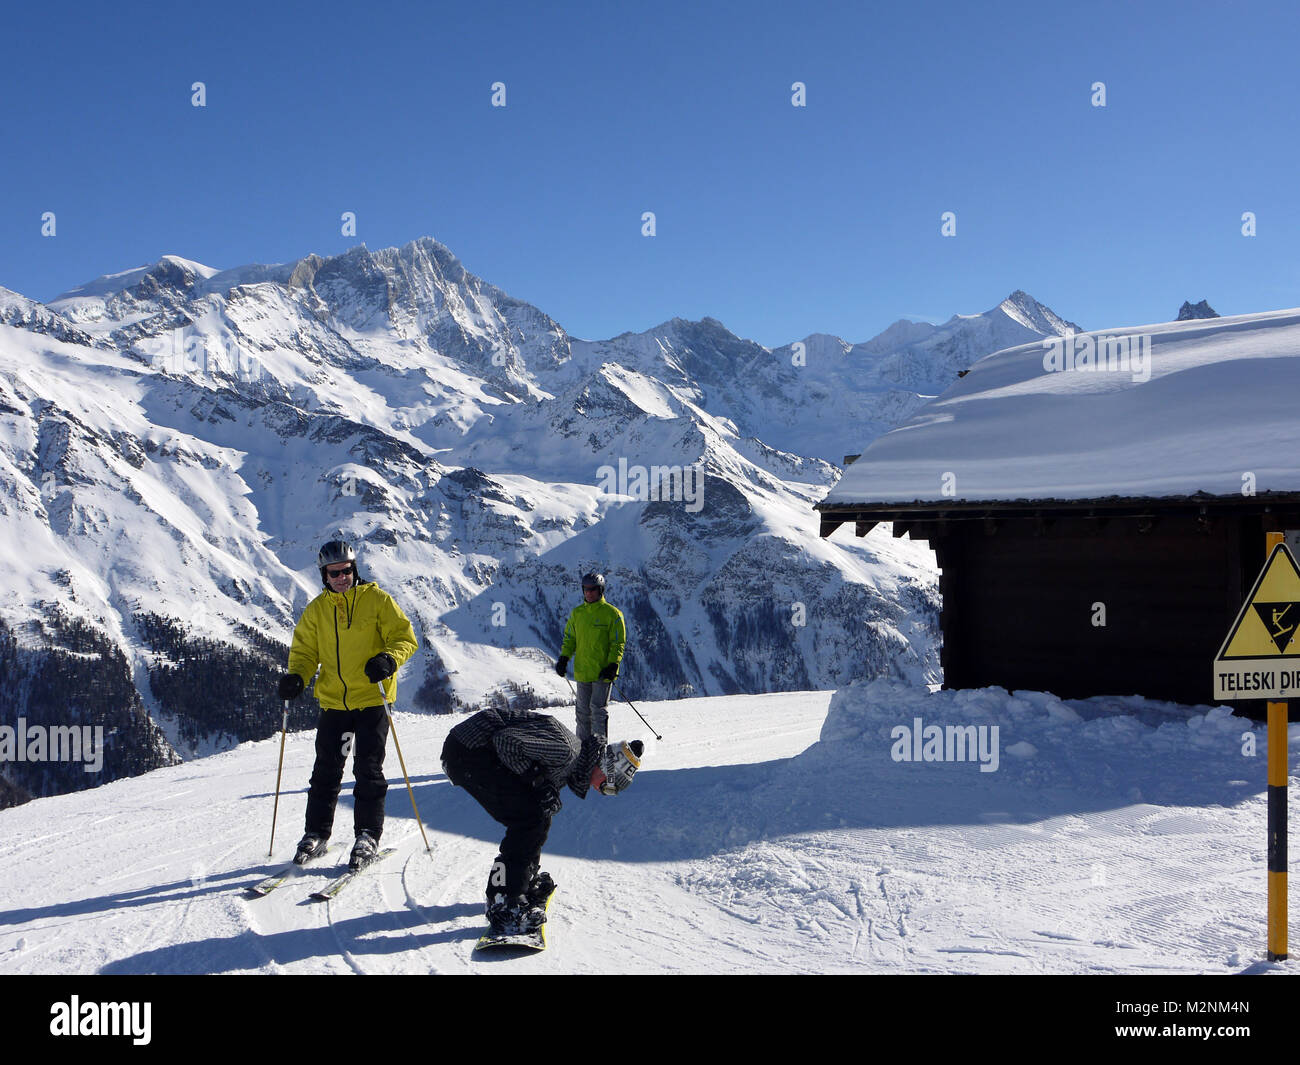 Winter scenes in the snowsports resort of Zinal in the Valais canton of Switzerland Stock Photo